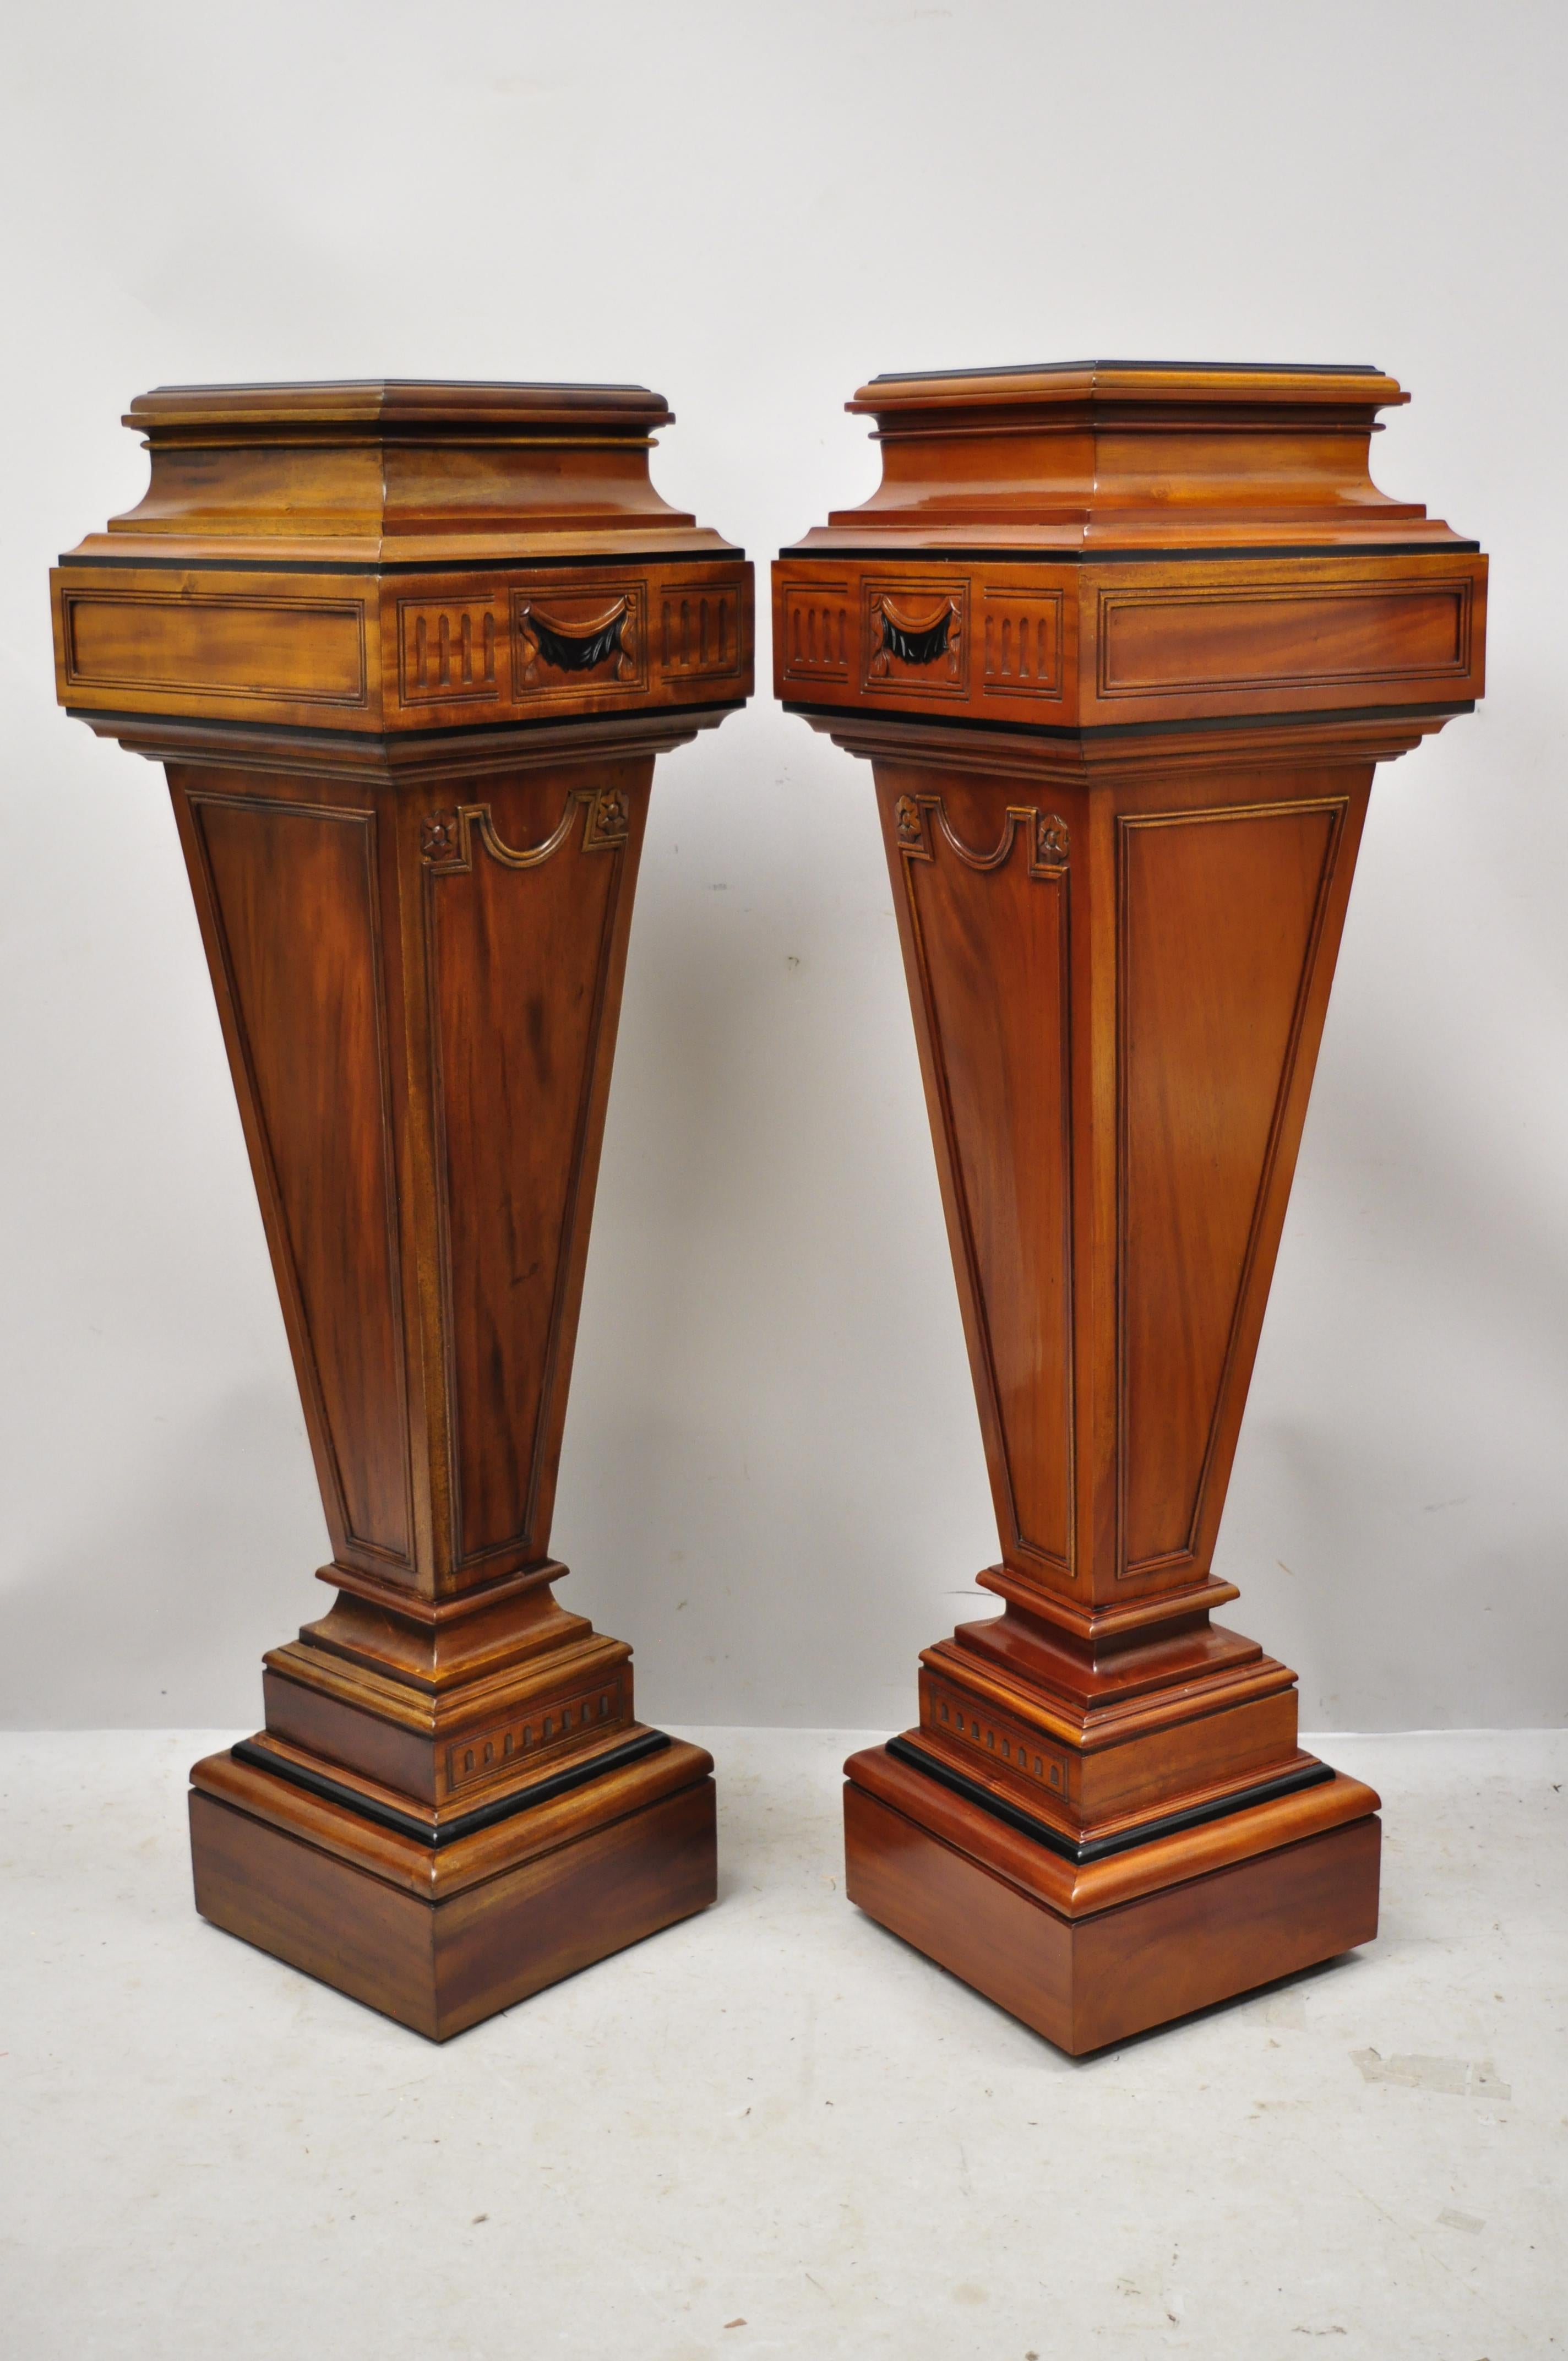 Late 20th century French Empire neoclassical style mahogany wood pedestal plant stands - a pair. Item features solid wood construction, beautiful wood grain, nicely carved details, great style and form, circa Late 20th-Early 21st century.